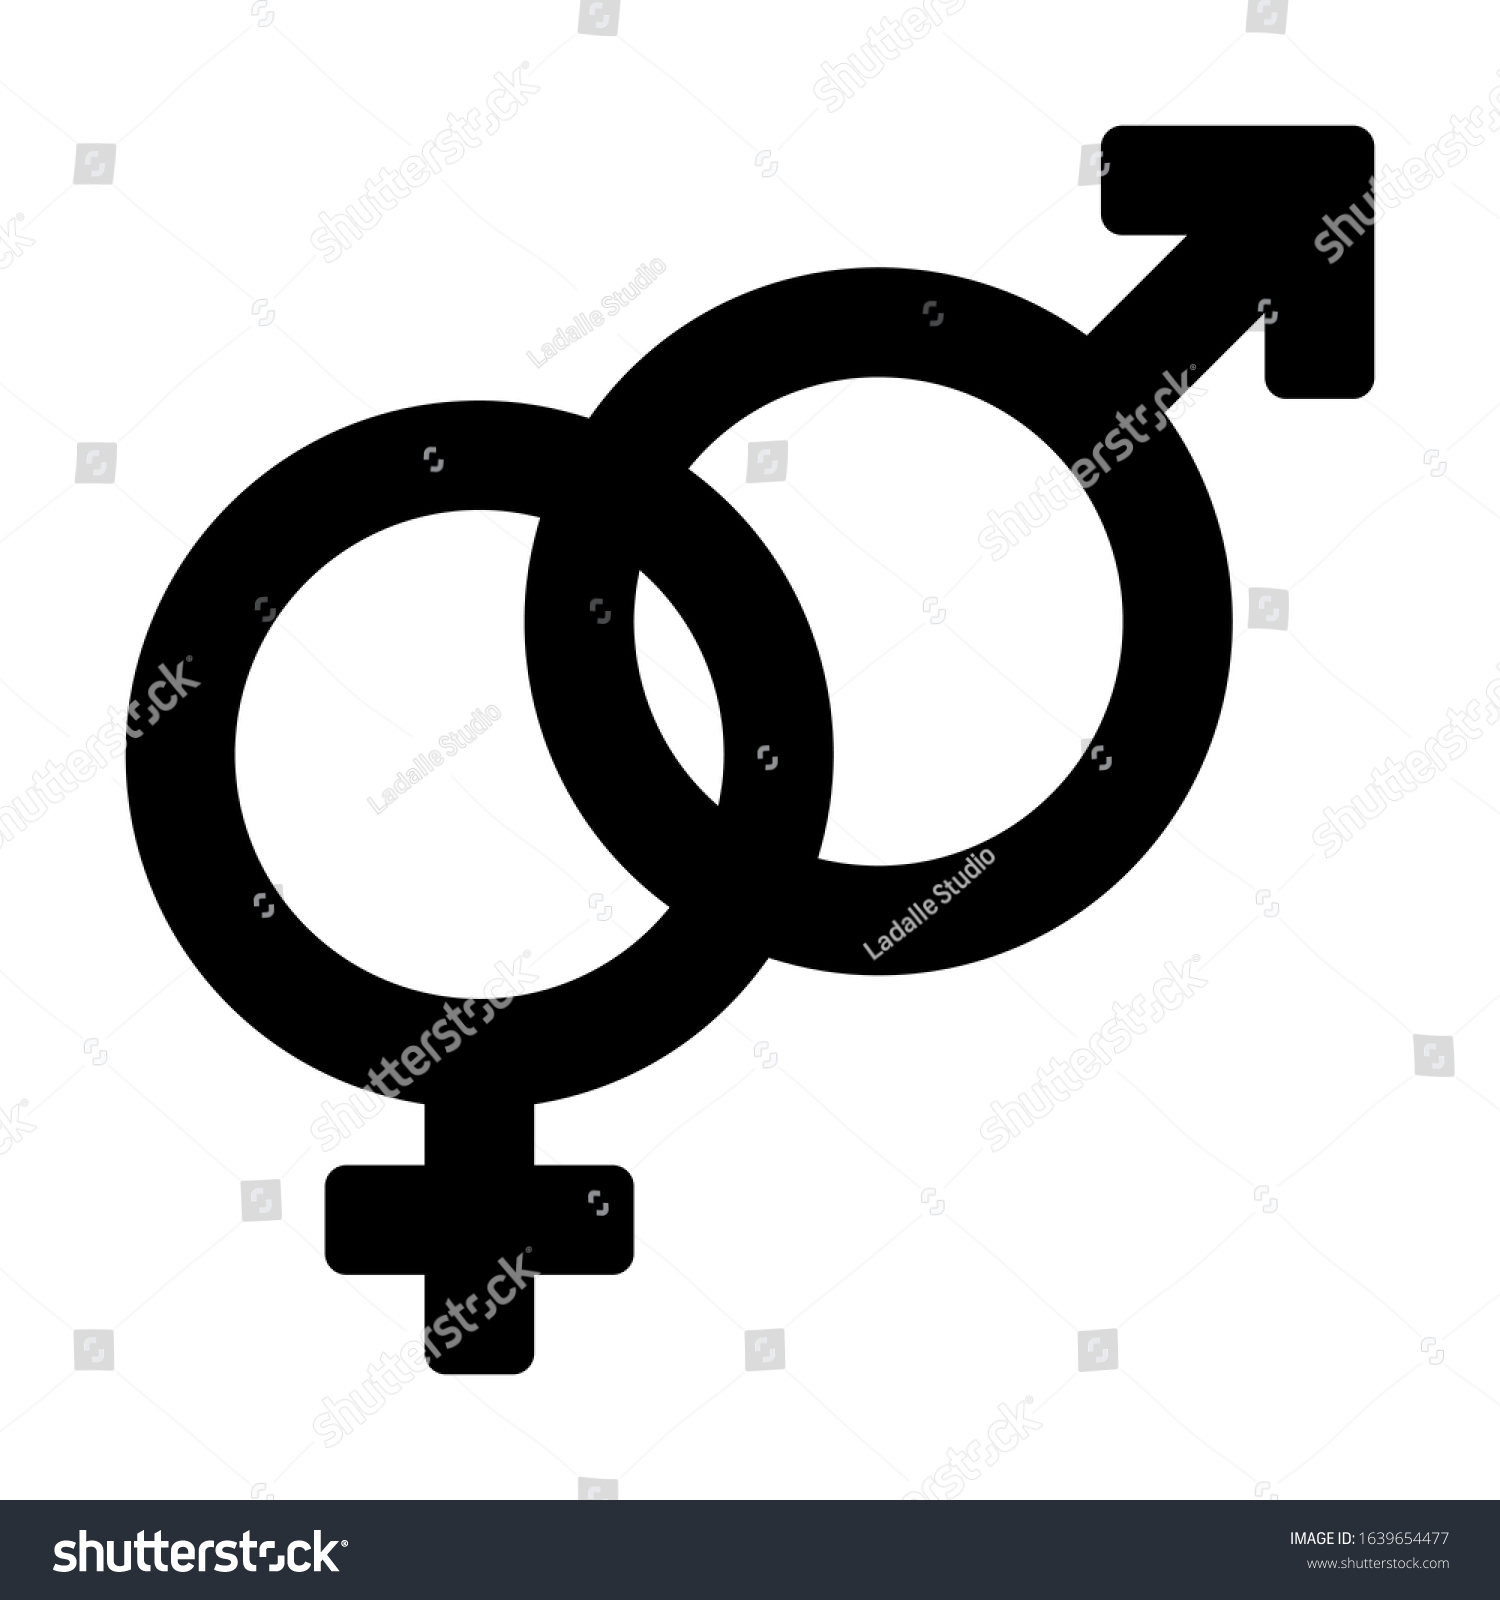 Sex Male And Female Gender Symbol Medical Royalty Free Stock